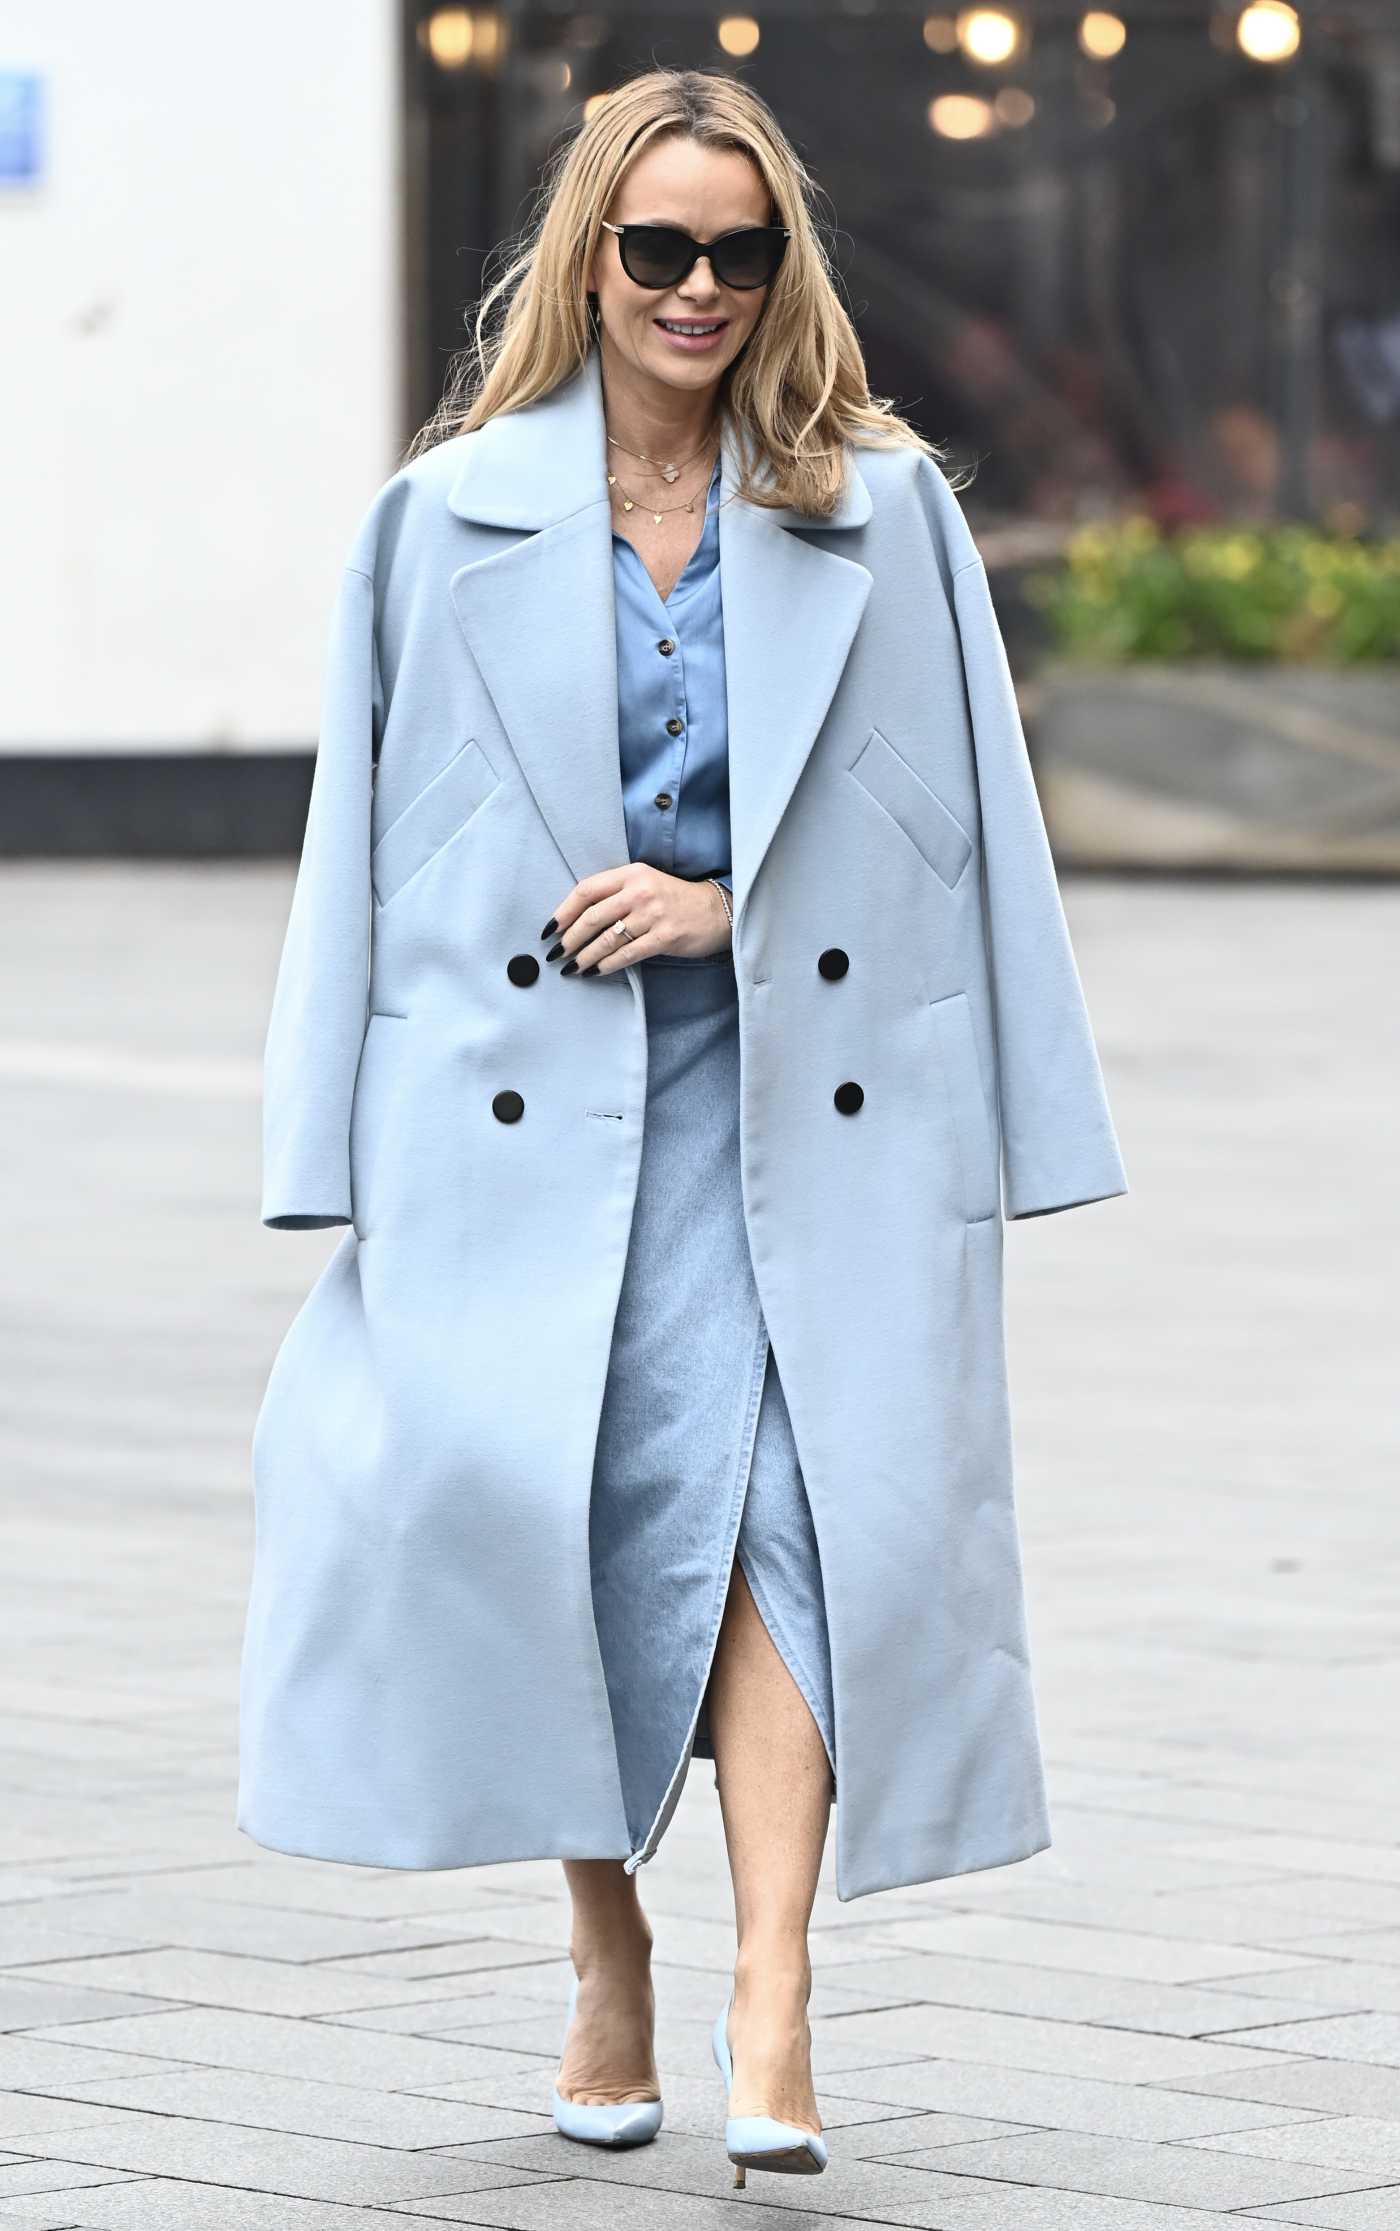 Amanda Holden in a White Suit Leaves the Global Radio Studios in London ...